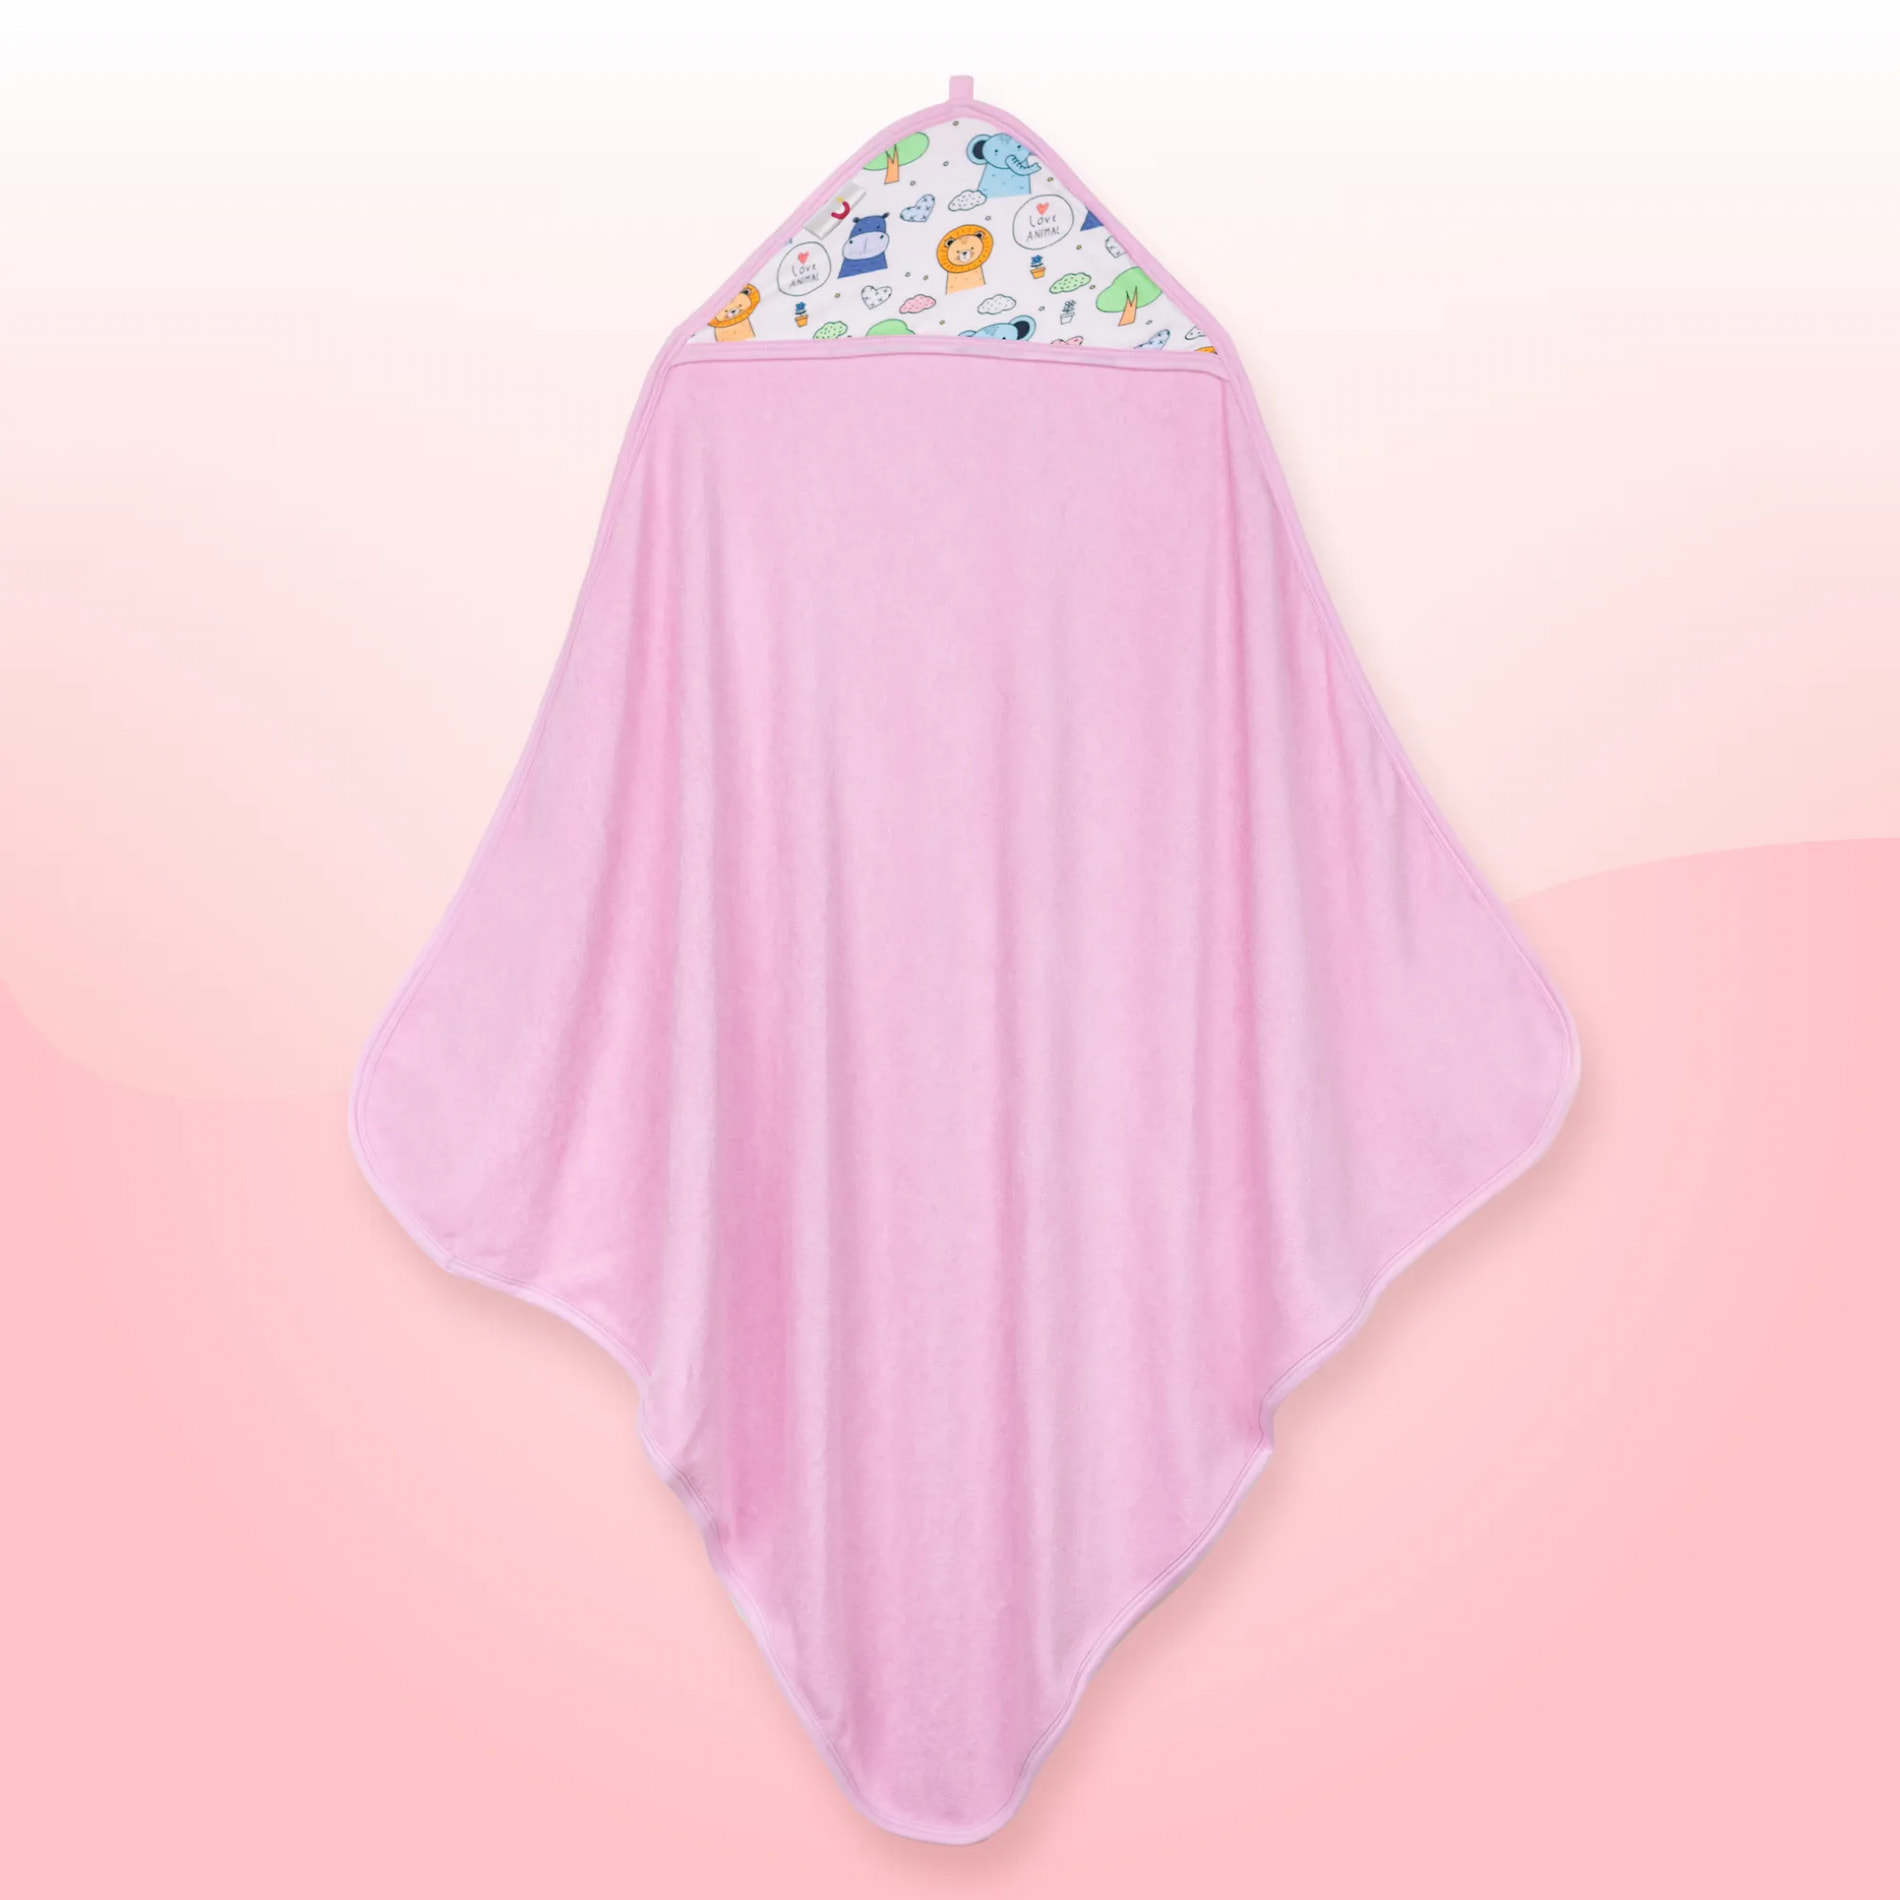 Baby Hooded Towel | Soft, Lightweight & Extra Absorbent |Keeps Baby Snug | Dries 3x Faster than Cotton | Baby Safari - Lavender (78 cm x 78cm)